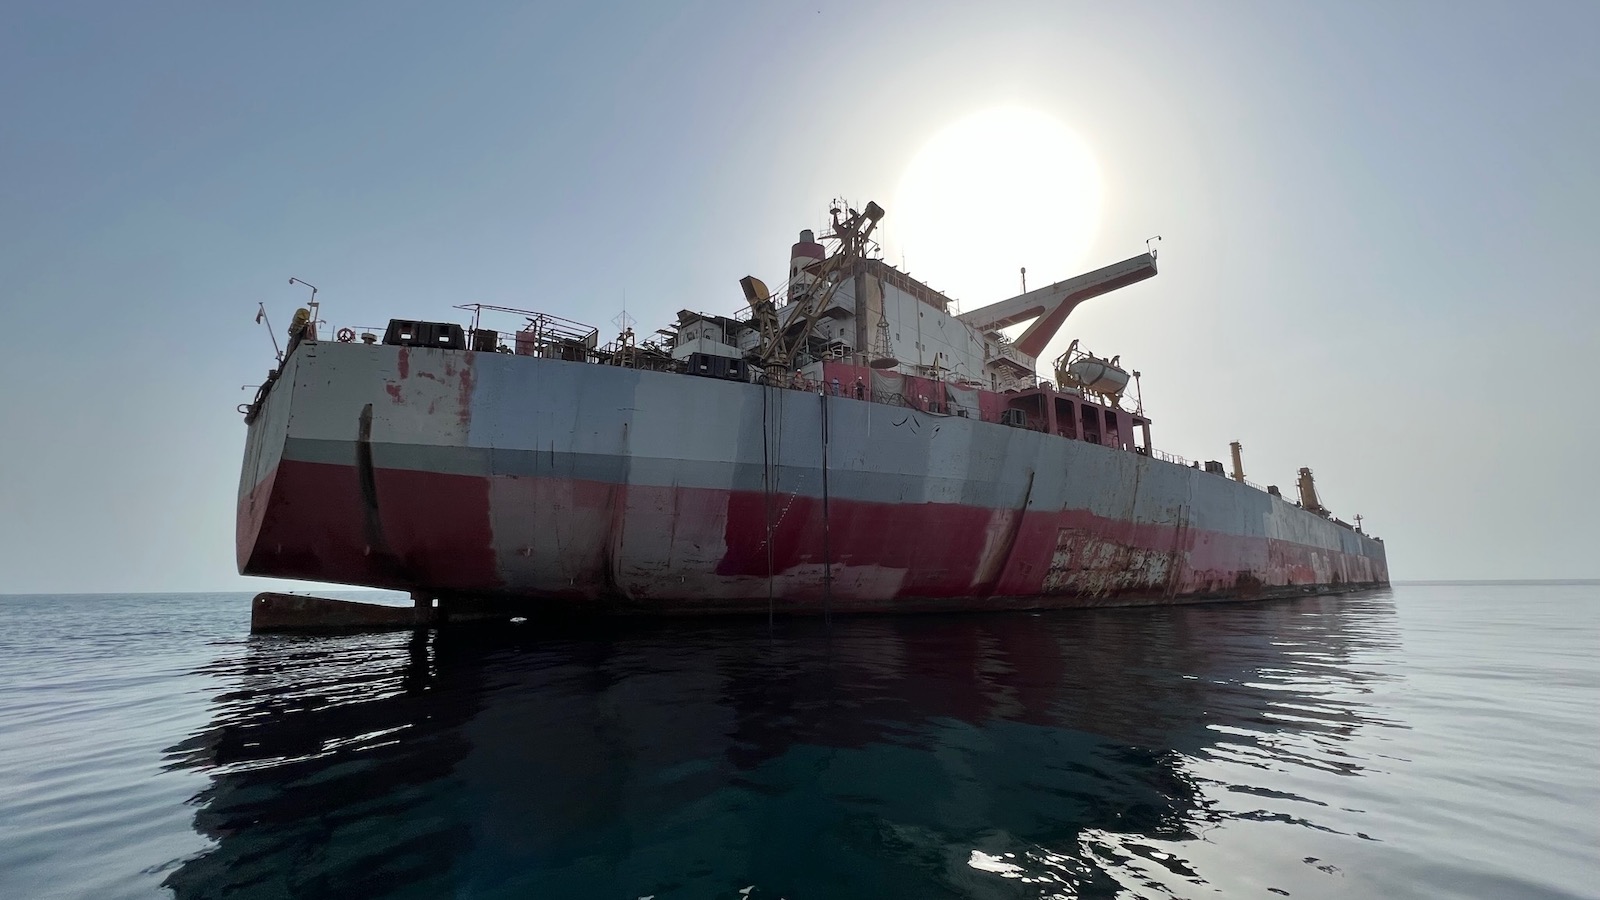 A rusting and decaying oil tanker called the FSO Safer is seen in the Red Sea with the sun shining brightly directly above it.